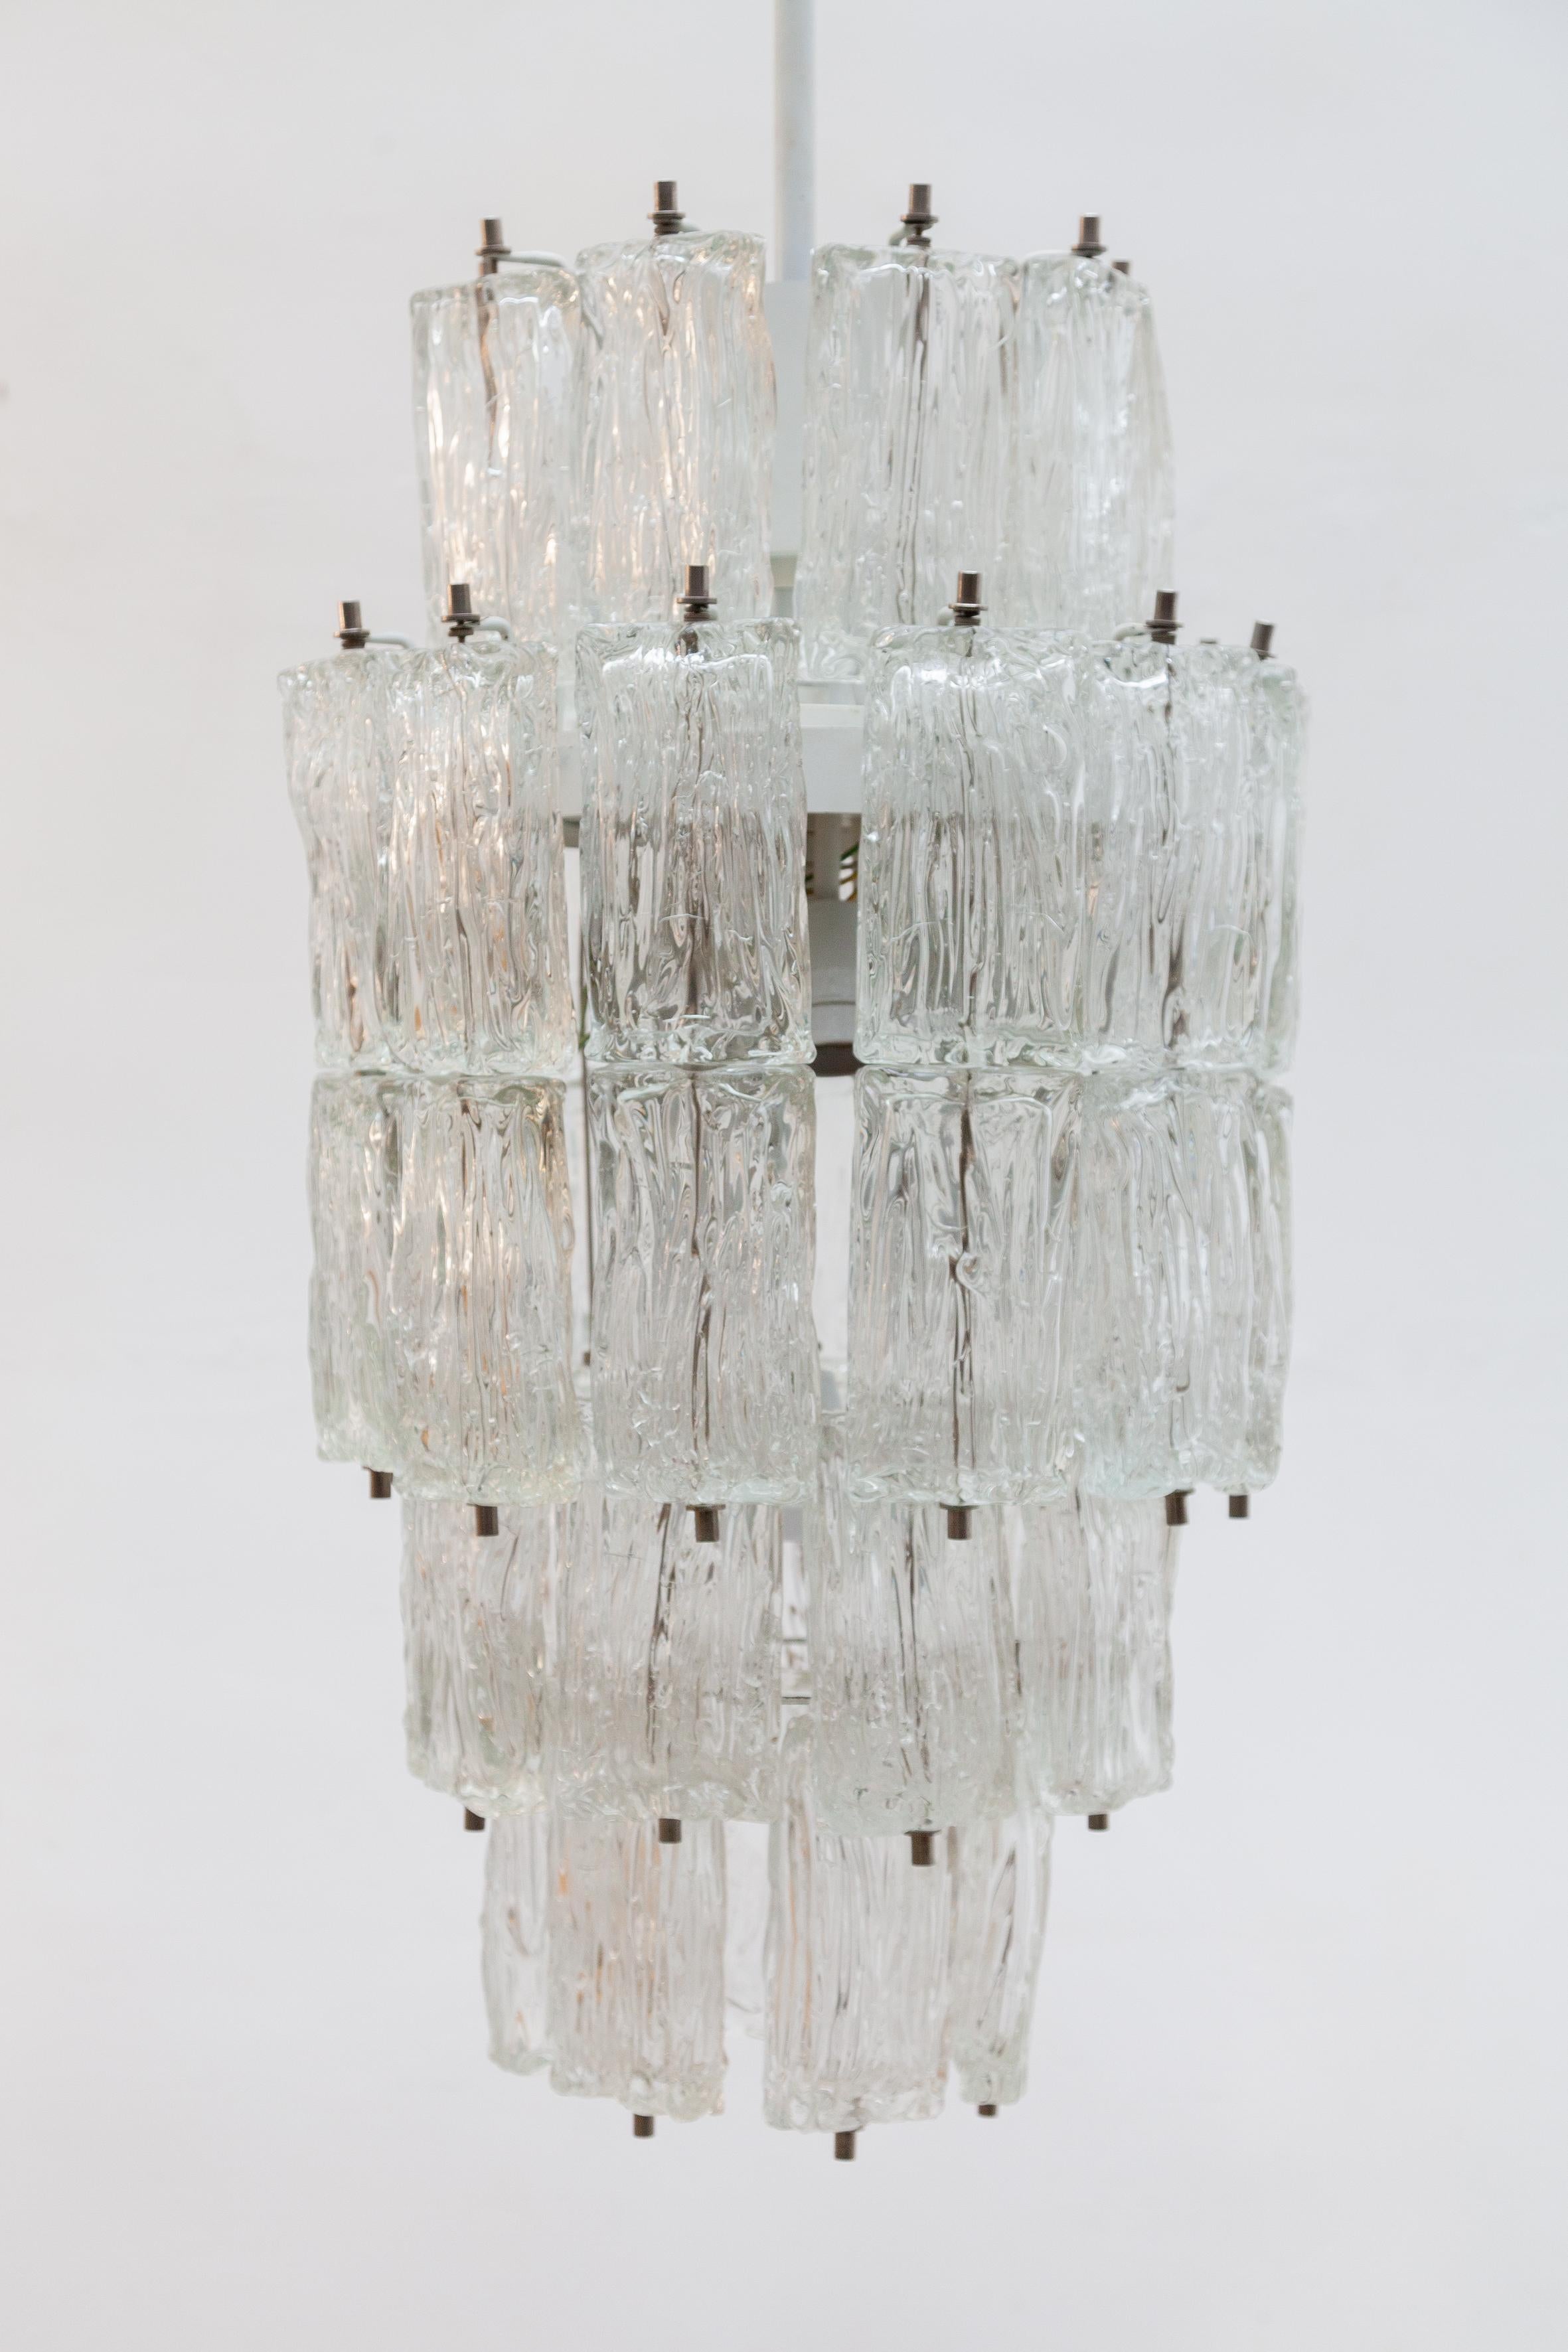 Venini Large Chandelier Iced Textured Clear Glass Five Tiers 1960s Murano, Italy 1